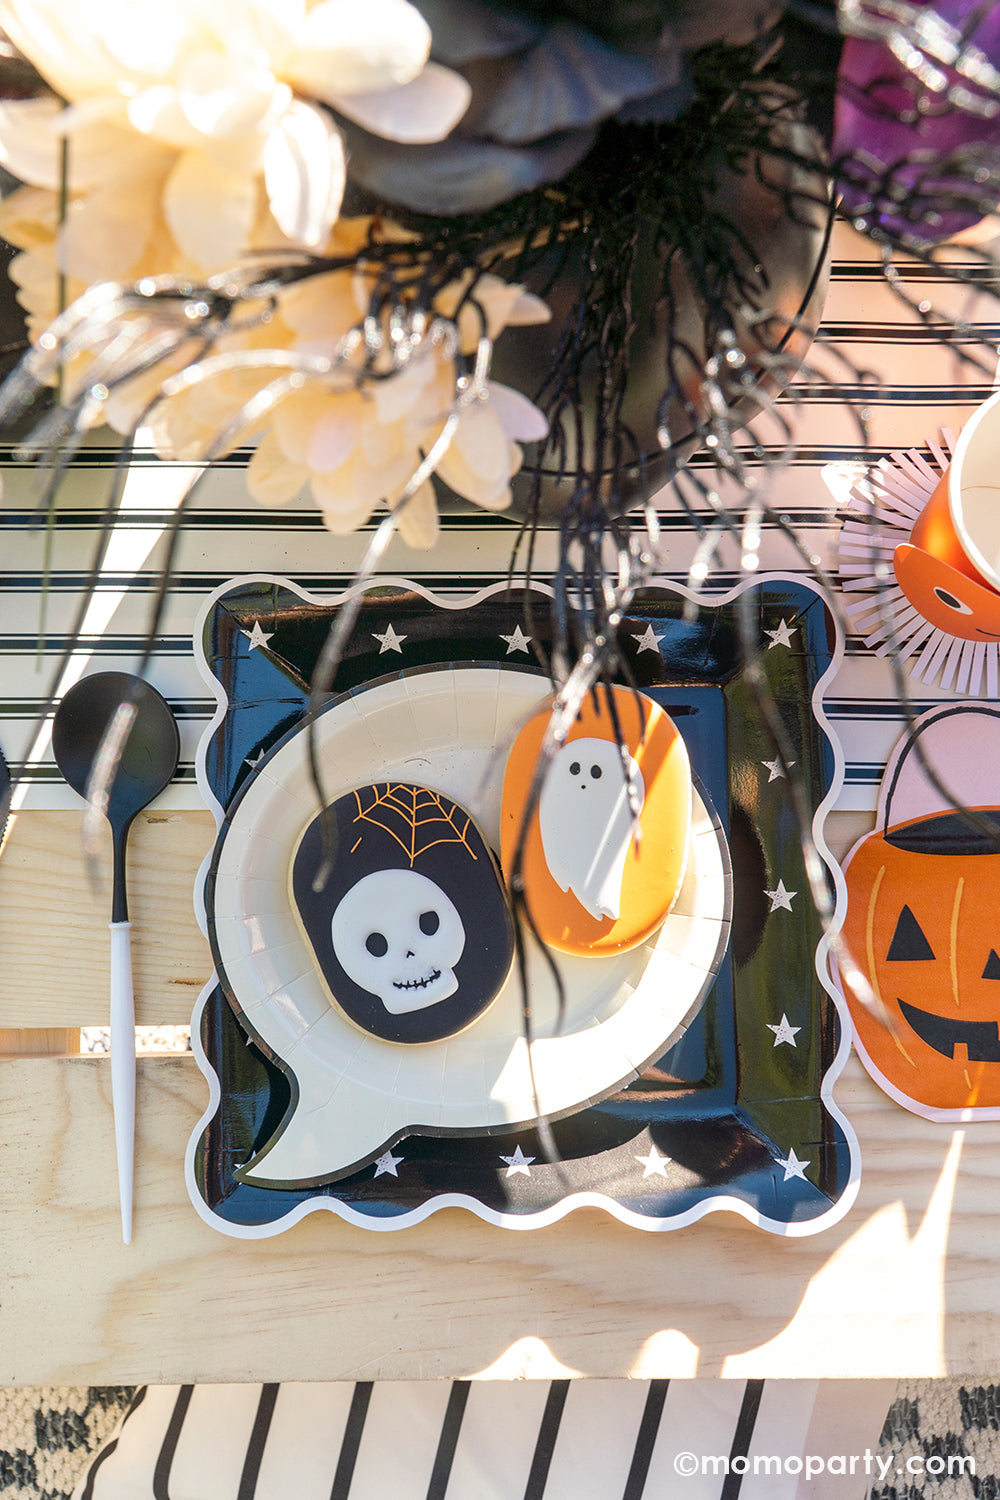 A spooky fun kid-friendly Halloween tablescape featuring My Mind's Eye's Night Sky Scalloped plates, Happy Haunting Boo Small Plates with had two matching Halloween themed sugar cookies on them, along with Jack o' Lantern pumpkin bucket shaped napkins and Meri Meri's Vintage Halloween party cups, on My Mind's Eye's black and white striped table runner, all makes a spook-tacular Halloween celebration inspo!